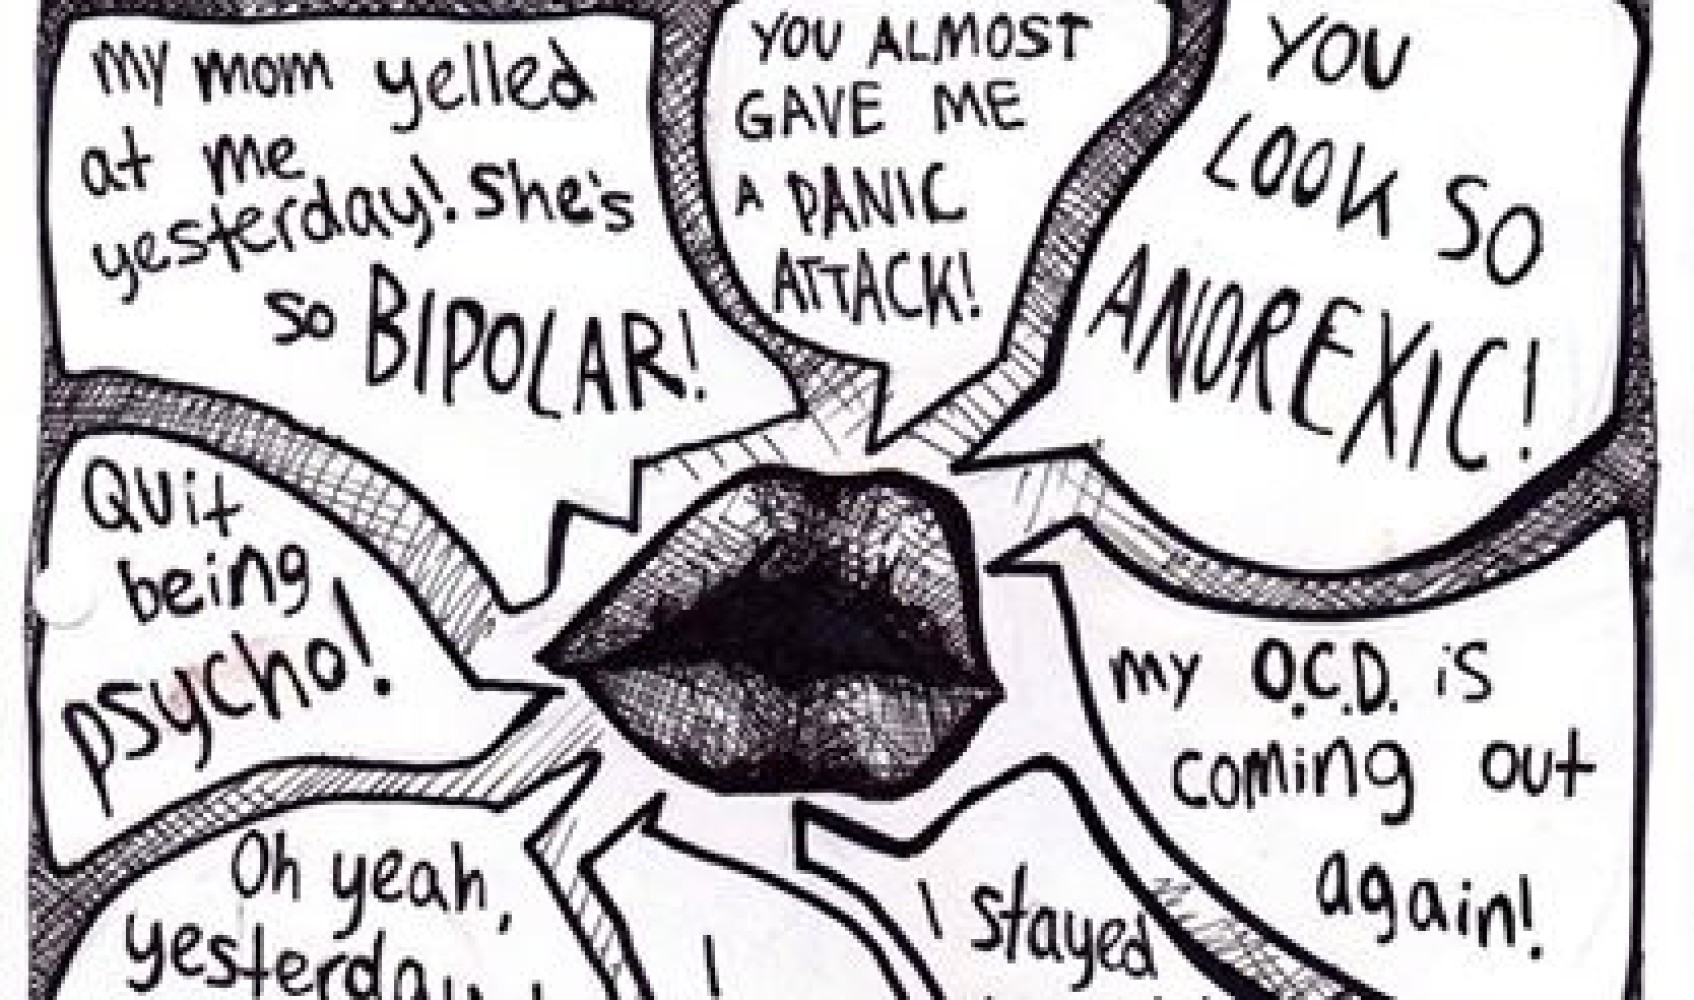 Mental disorders are not adjectives.